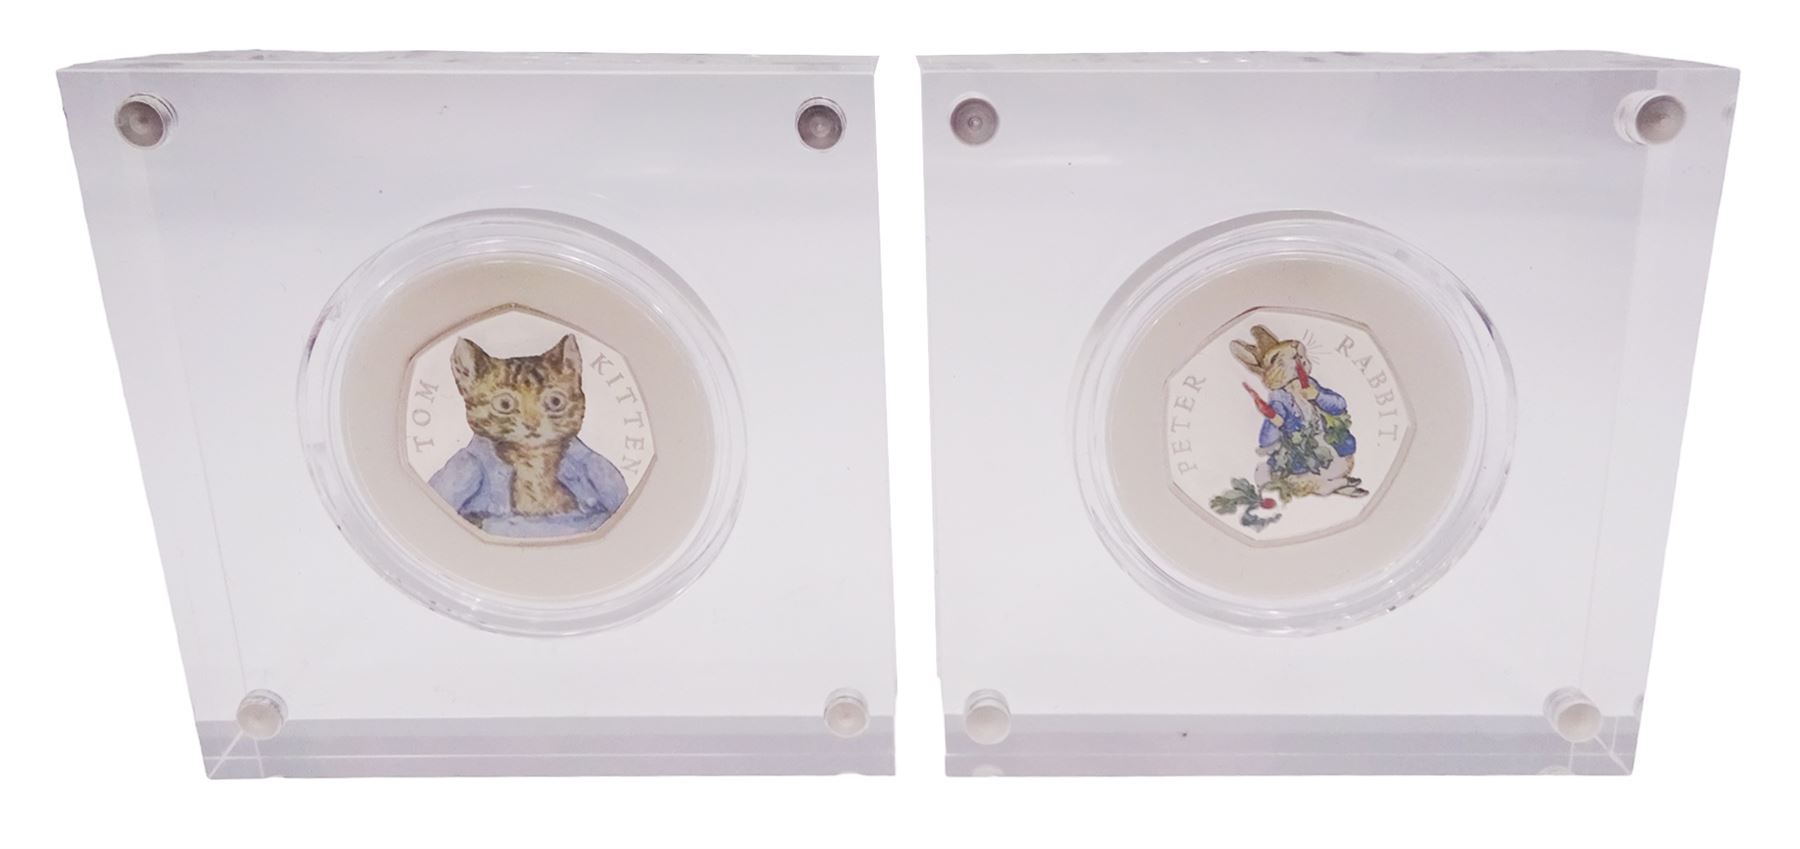 Two The Royal Mint United Kingdom Beatrix Potter silver proof fifty pence coins - Image 2 of 4